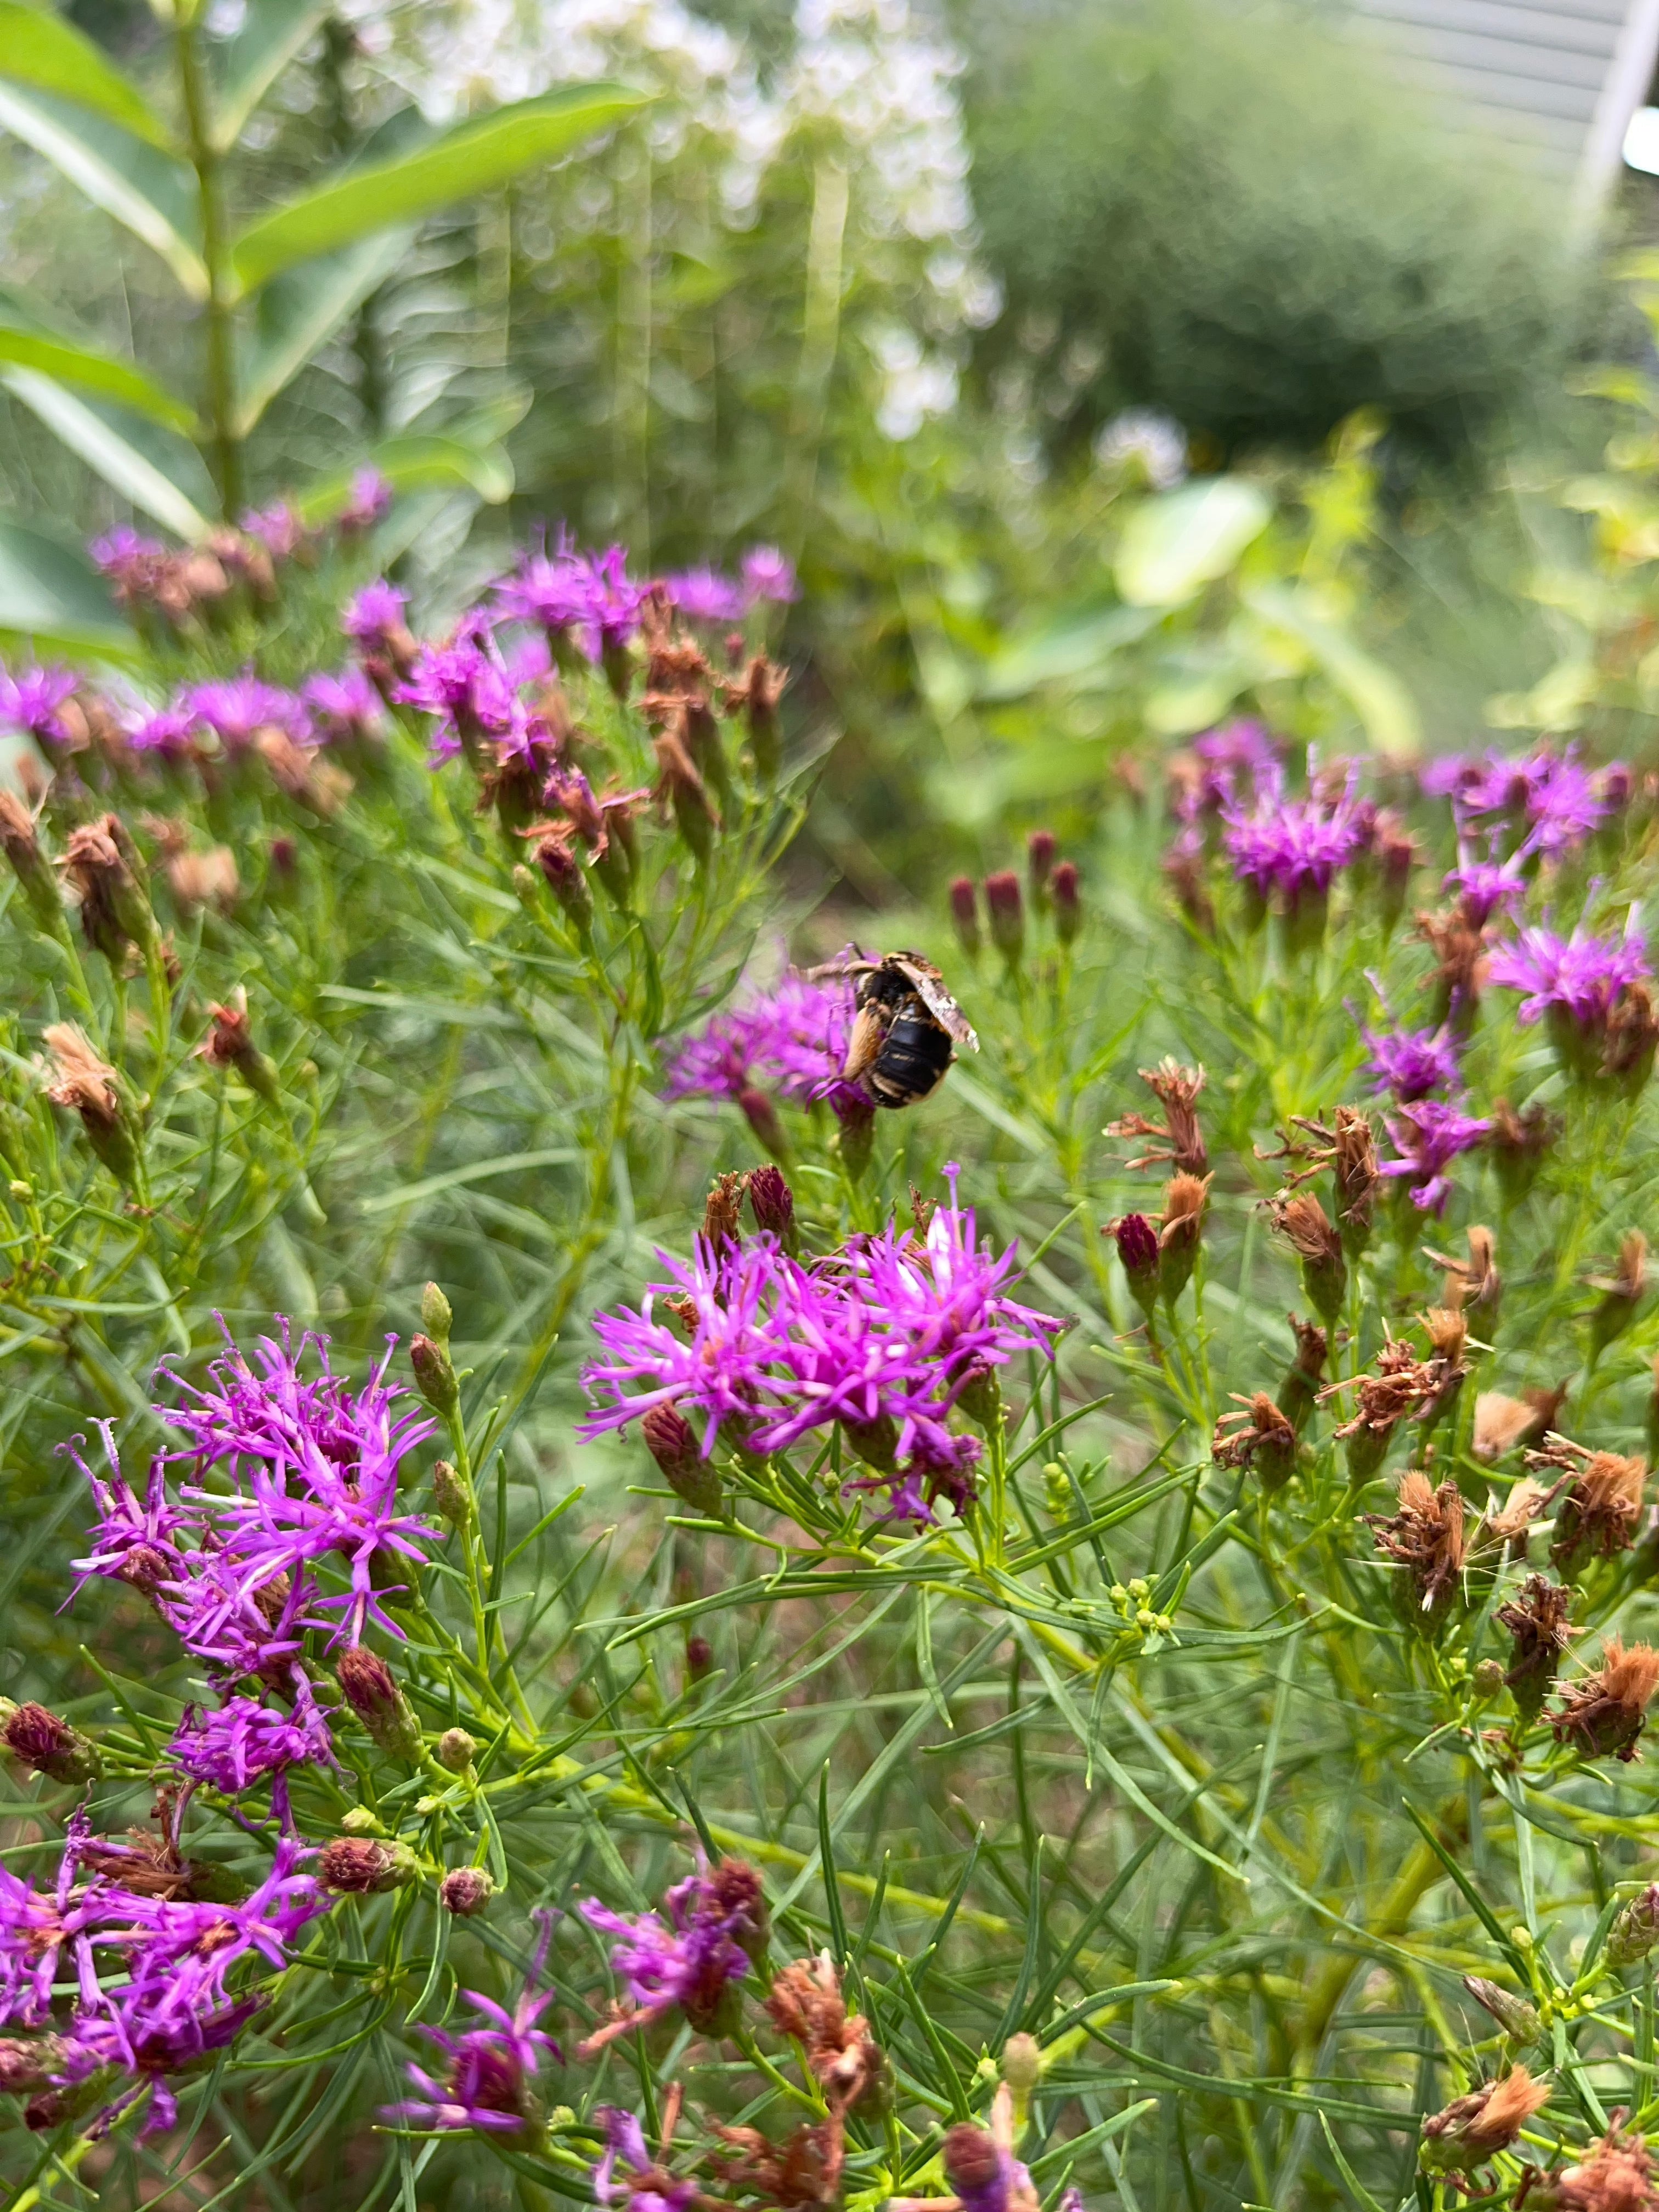 Vernonia lettermanni / Bushy Ironweed (Aster Family)